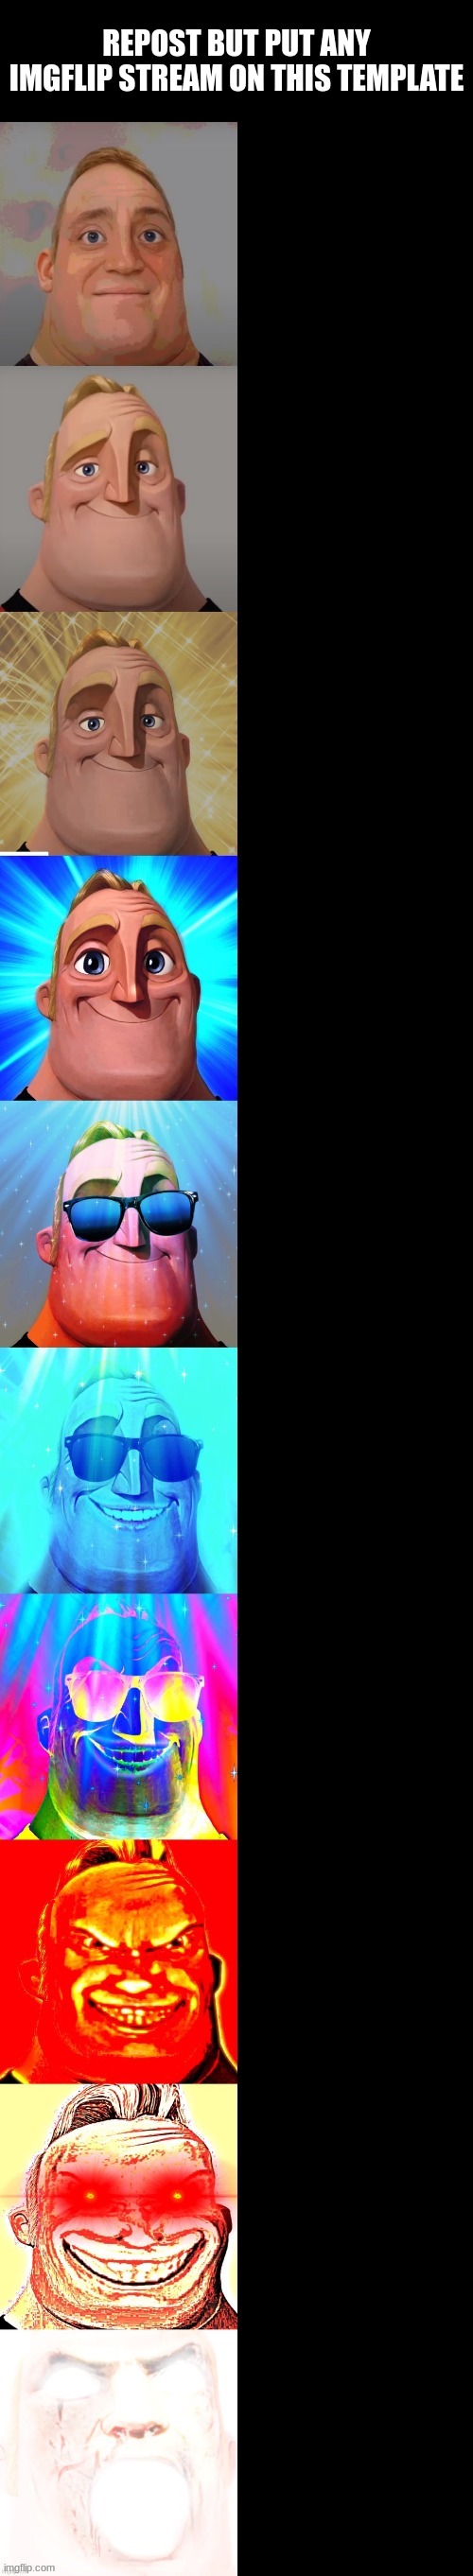 mr incredible becoming canny | REPOST BUT PUT ANY IMGFLIP STREAM ON THIS TEMPLATE | image tagged in mr incredible becoming canny,memes,stream | made w/ Imgflip meme maker